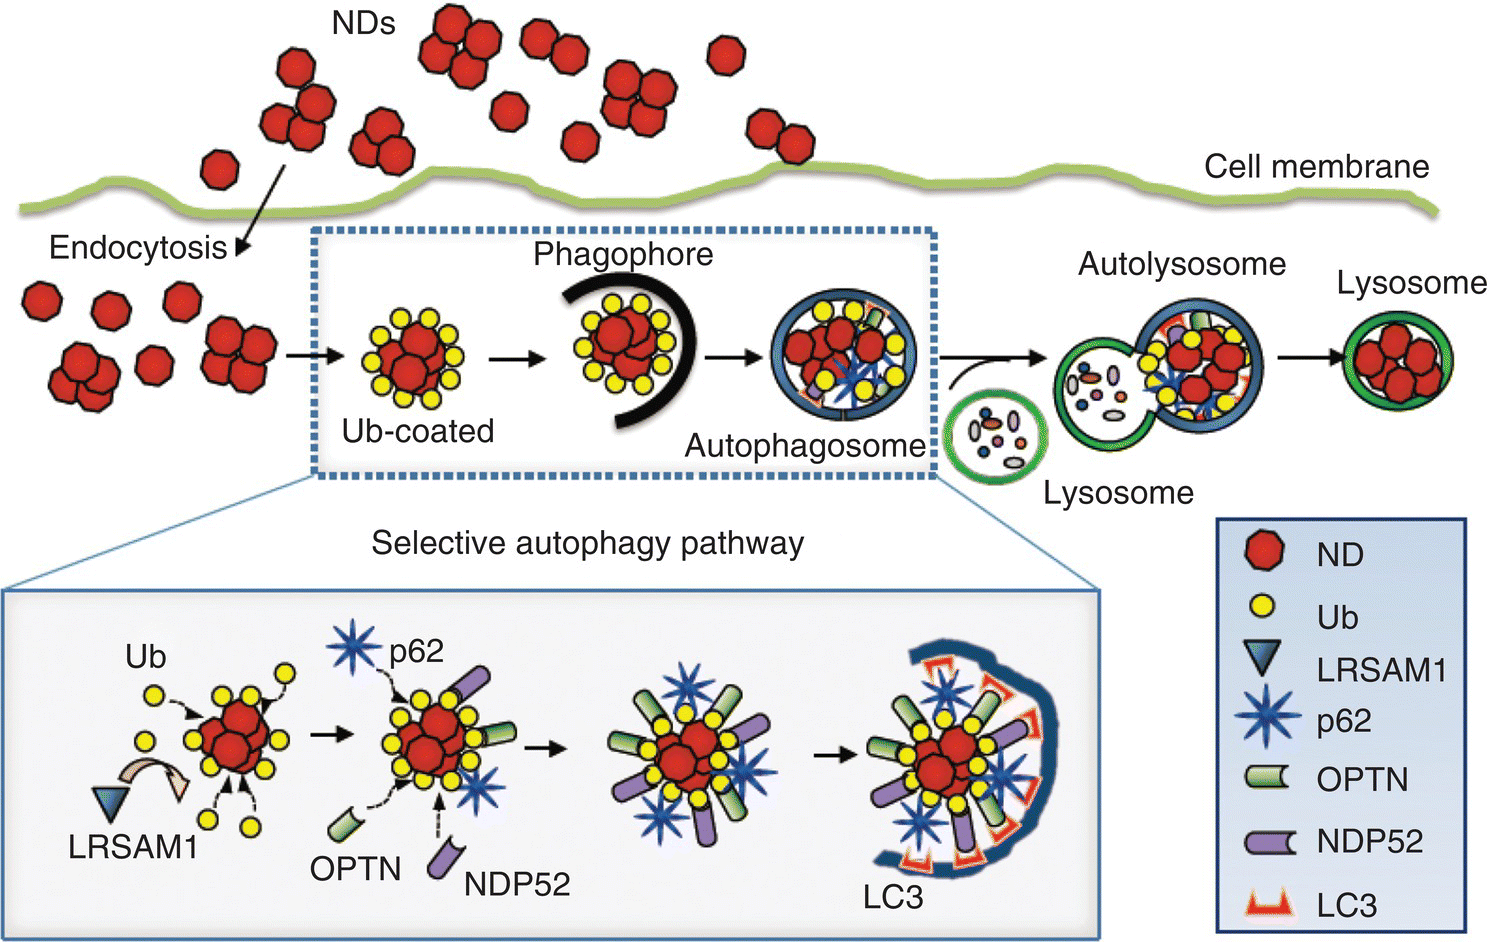 Schematic illustrating a model for the conjugation of Ub‐coated FNDs with autophagy receptors, from NDs to endocytosis, and to lysosome. At the right are different symbols representing ND, LRSAM1, Ub, etc.